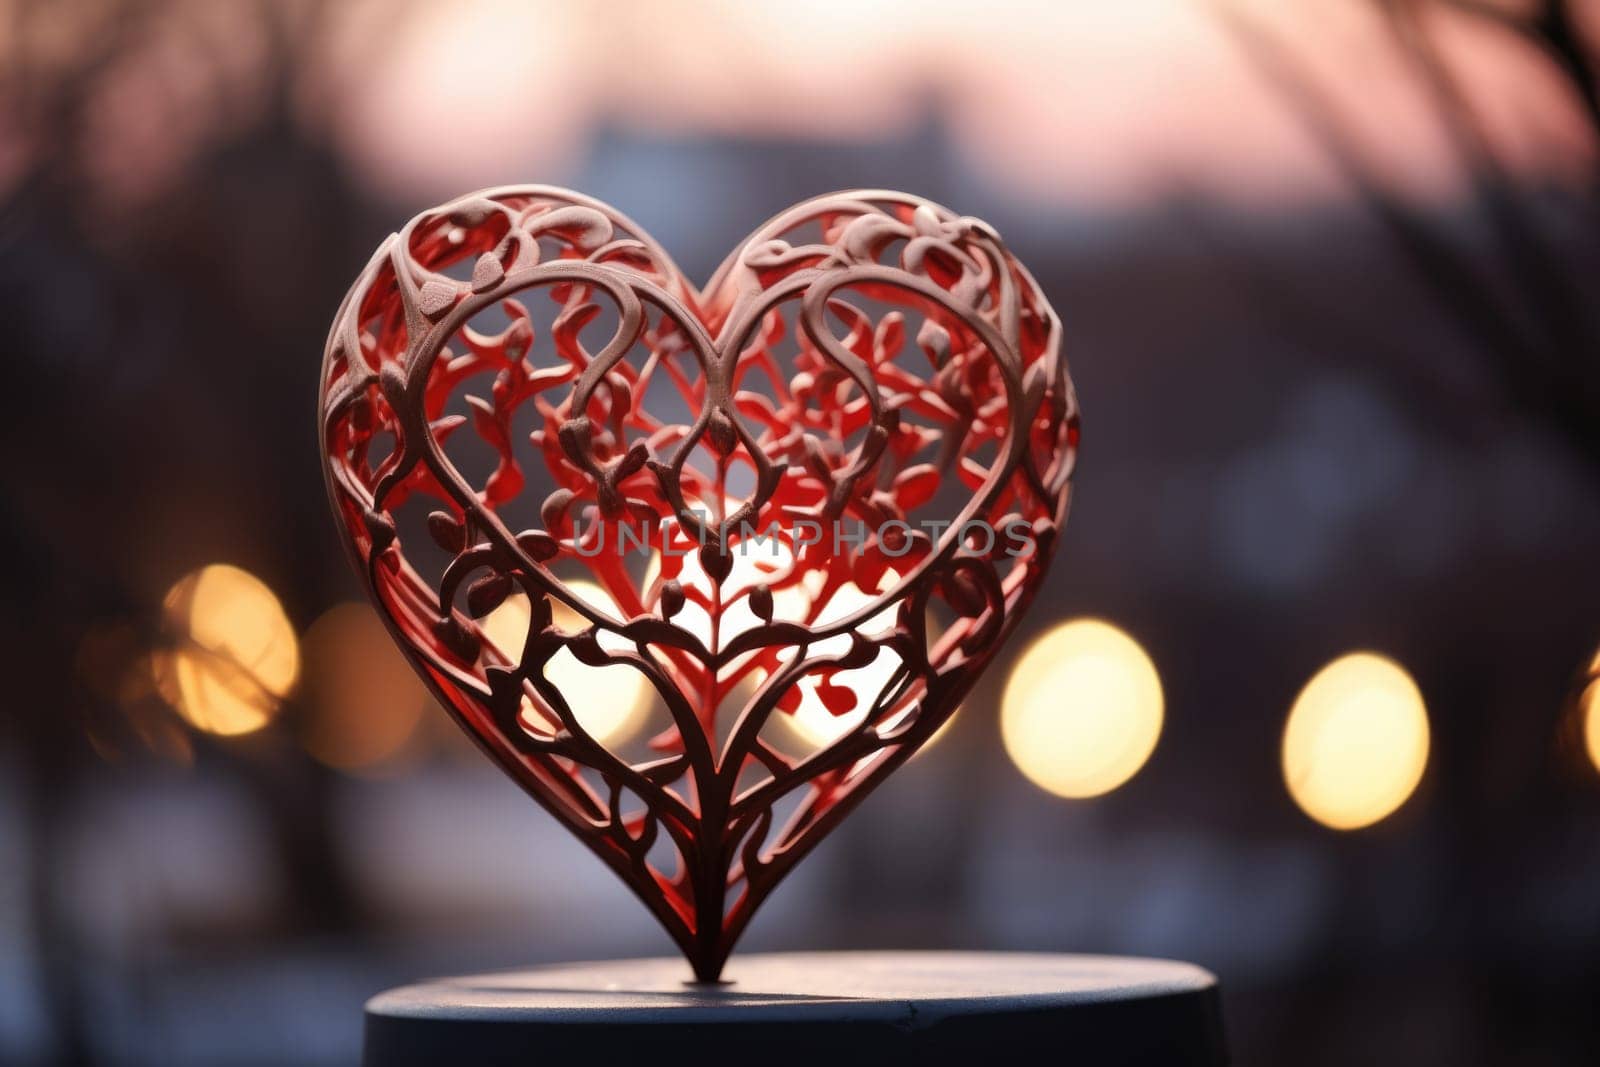 A red heart shaped sculpture on a table